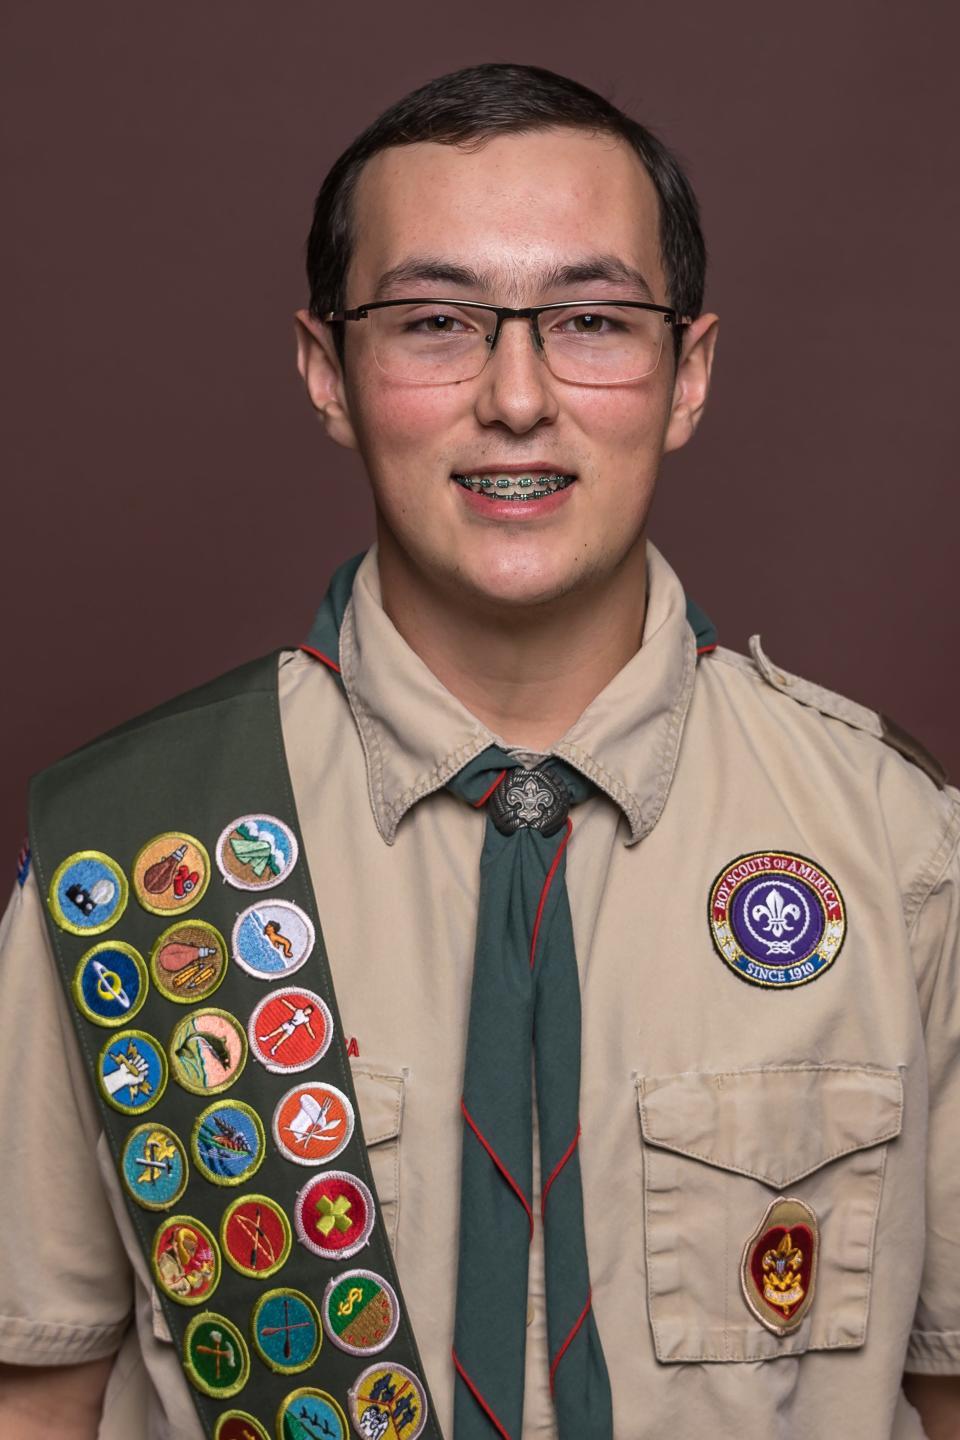 17-year-old student Devin Love earned his Eagle Scout Rank.